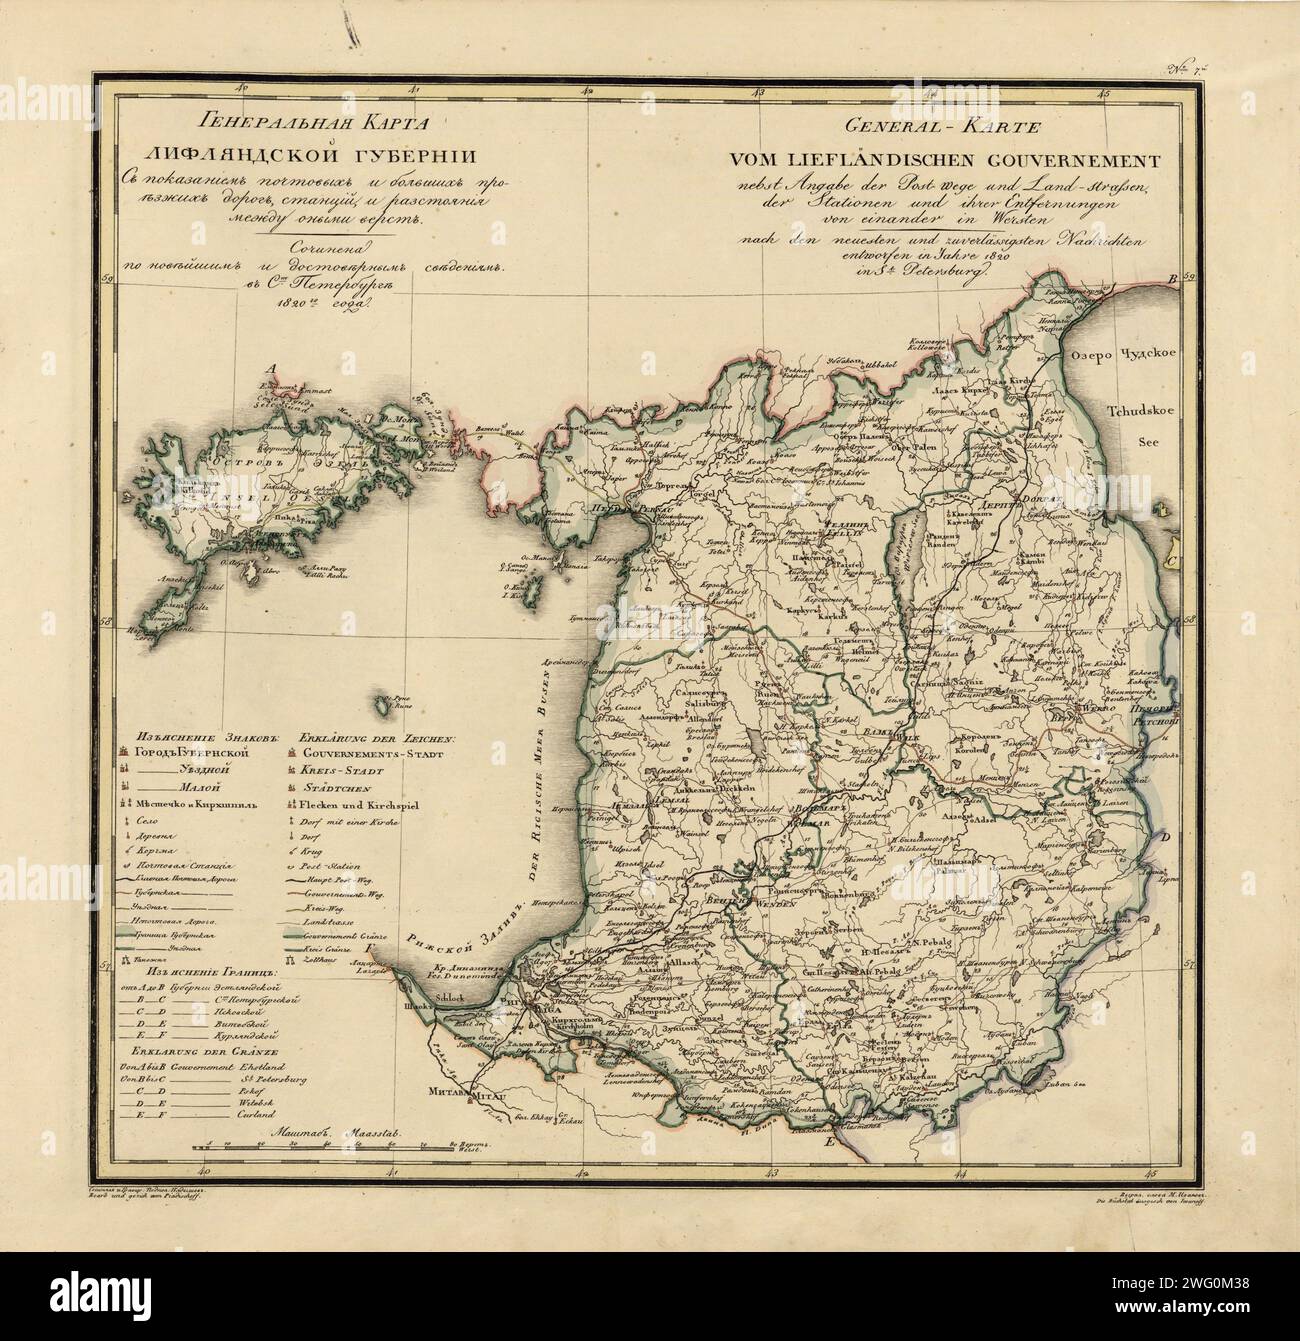 General Map of Livland Province: Showing Postal and Major Roads, Stations and the Distance in Versts between Them, 1820. This 1820 map of Livland Provinceis from a larger work,Geograficheskii atlas Rossiiskoi imperii, tsarstva Pol'skogo i velikogo kniazhestva Finliandskogo(Geographical atlas of the Russian Empire, the Kingdom of Poland, and the Grand Duchy of Finland), containing 60 maps of the Russian Empire. Compiled and engraved by Colonel V.P. Piadyshev, it reflects the detailed mapping carried out by Russian military cartographers in the first quarter of the 19th century. The map shows po Stock Photo